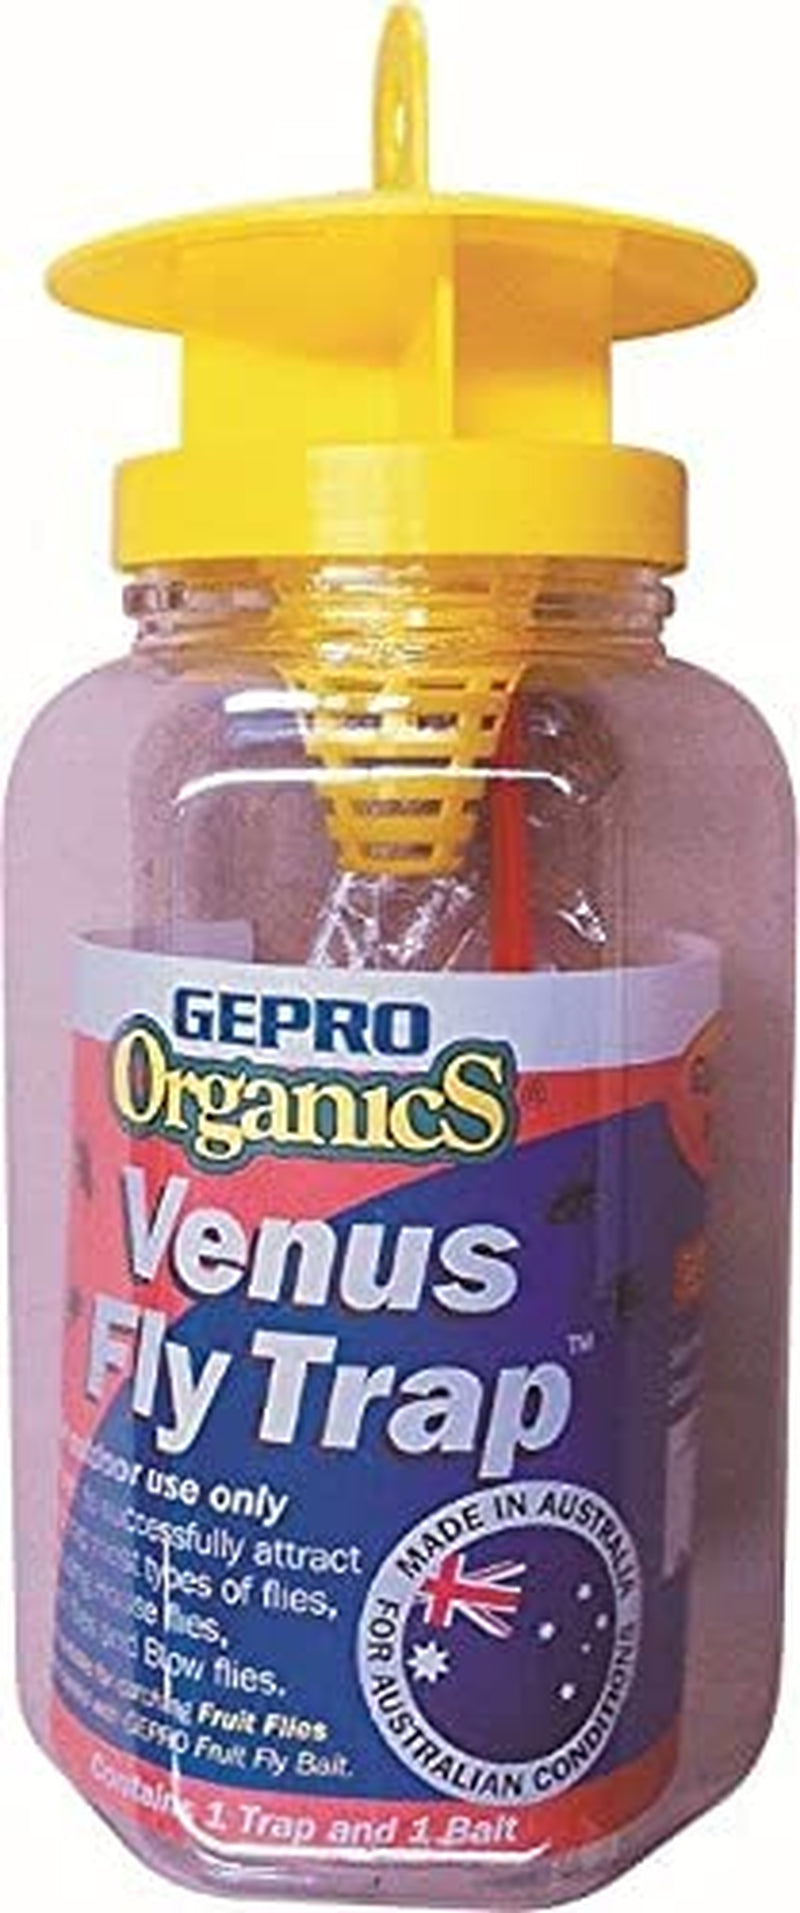 Gepro, Gepro Venus Fly Trap 700 Ml